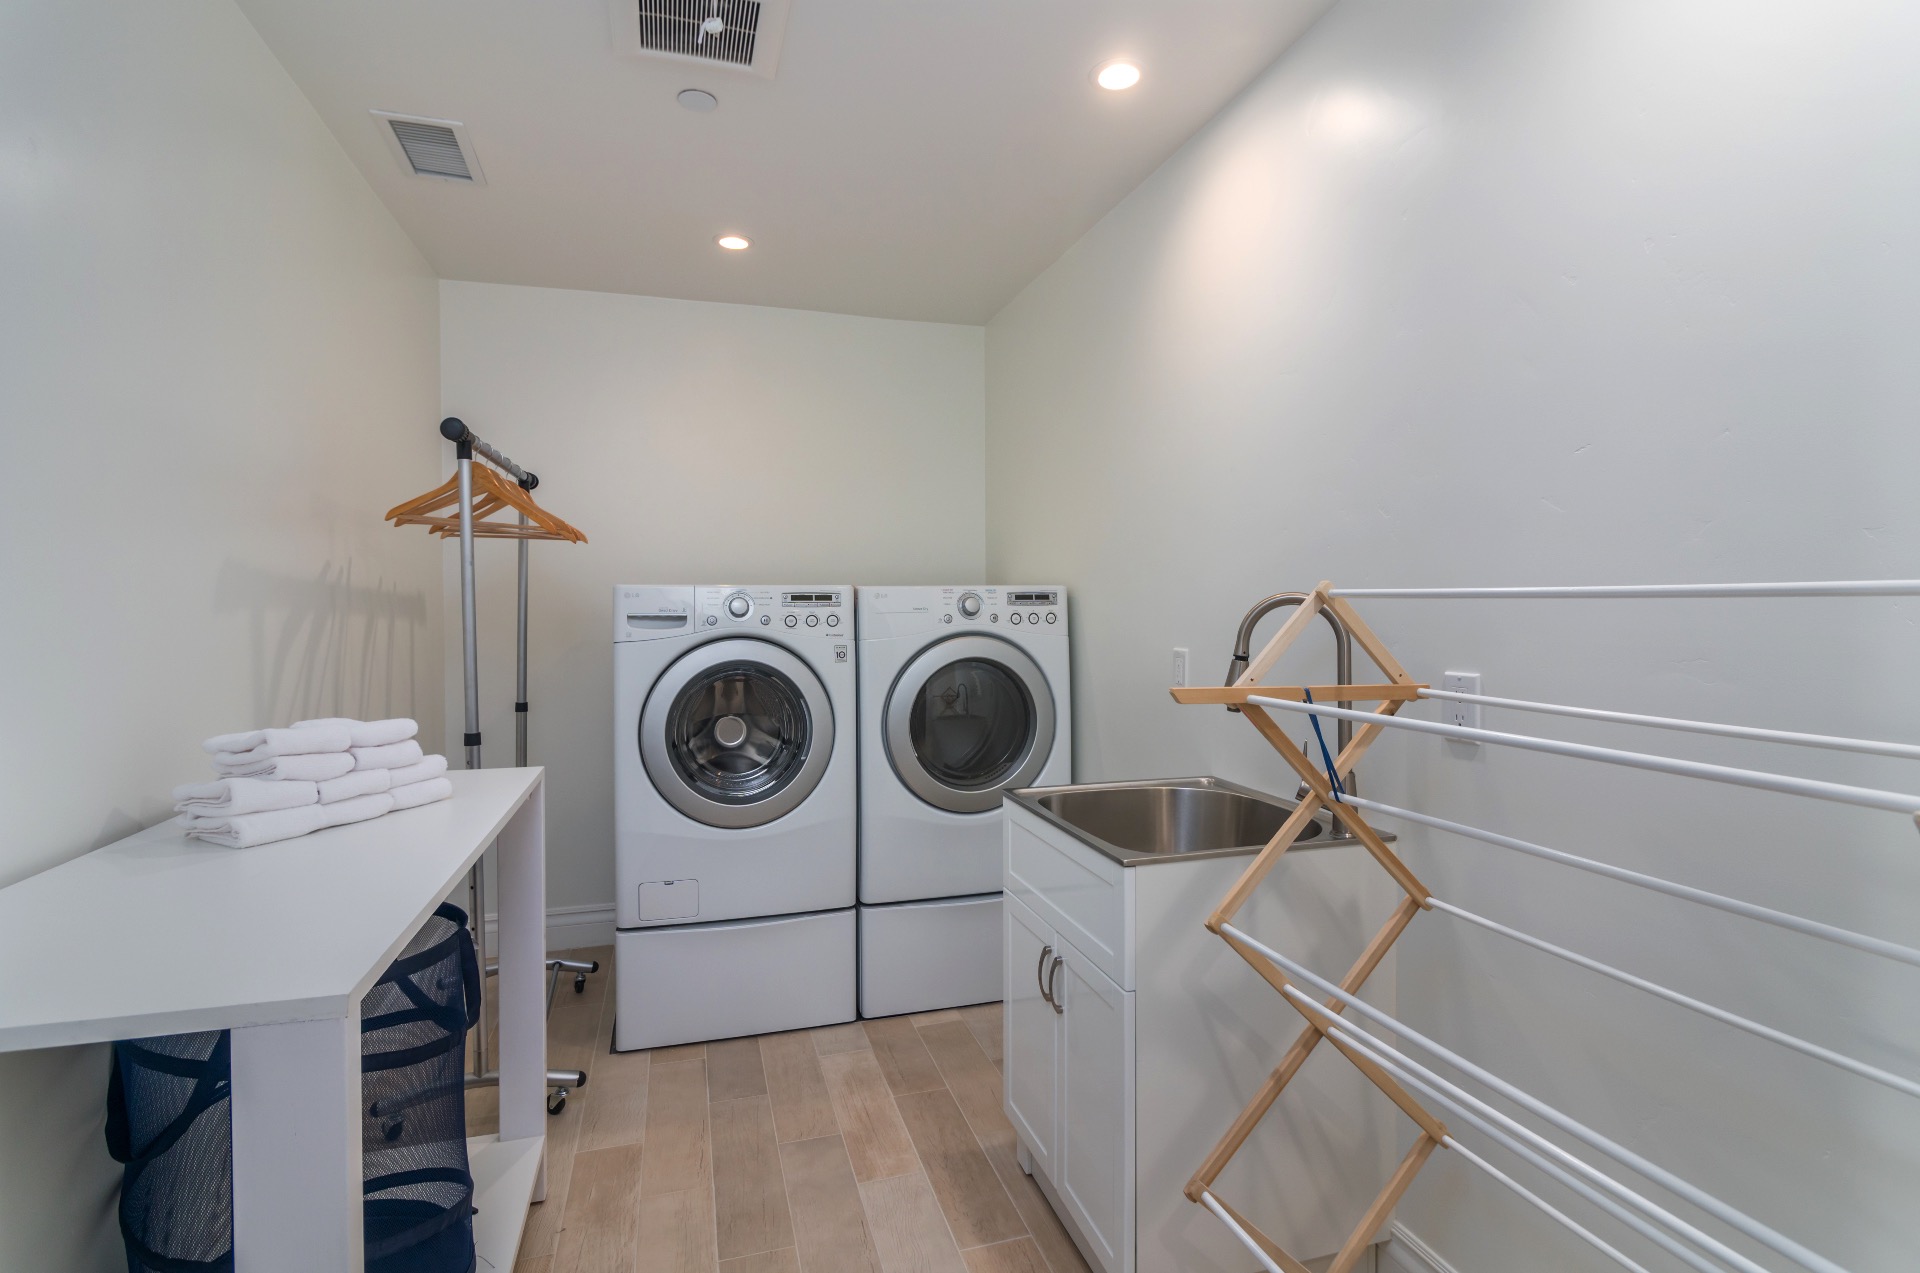 The laundry room is located upstairs by the master bedroom.